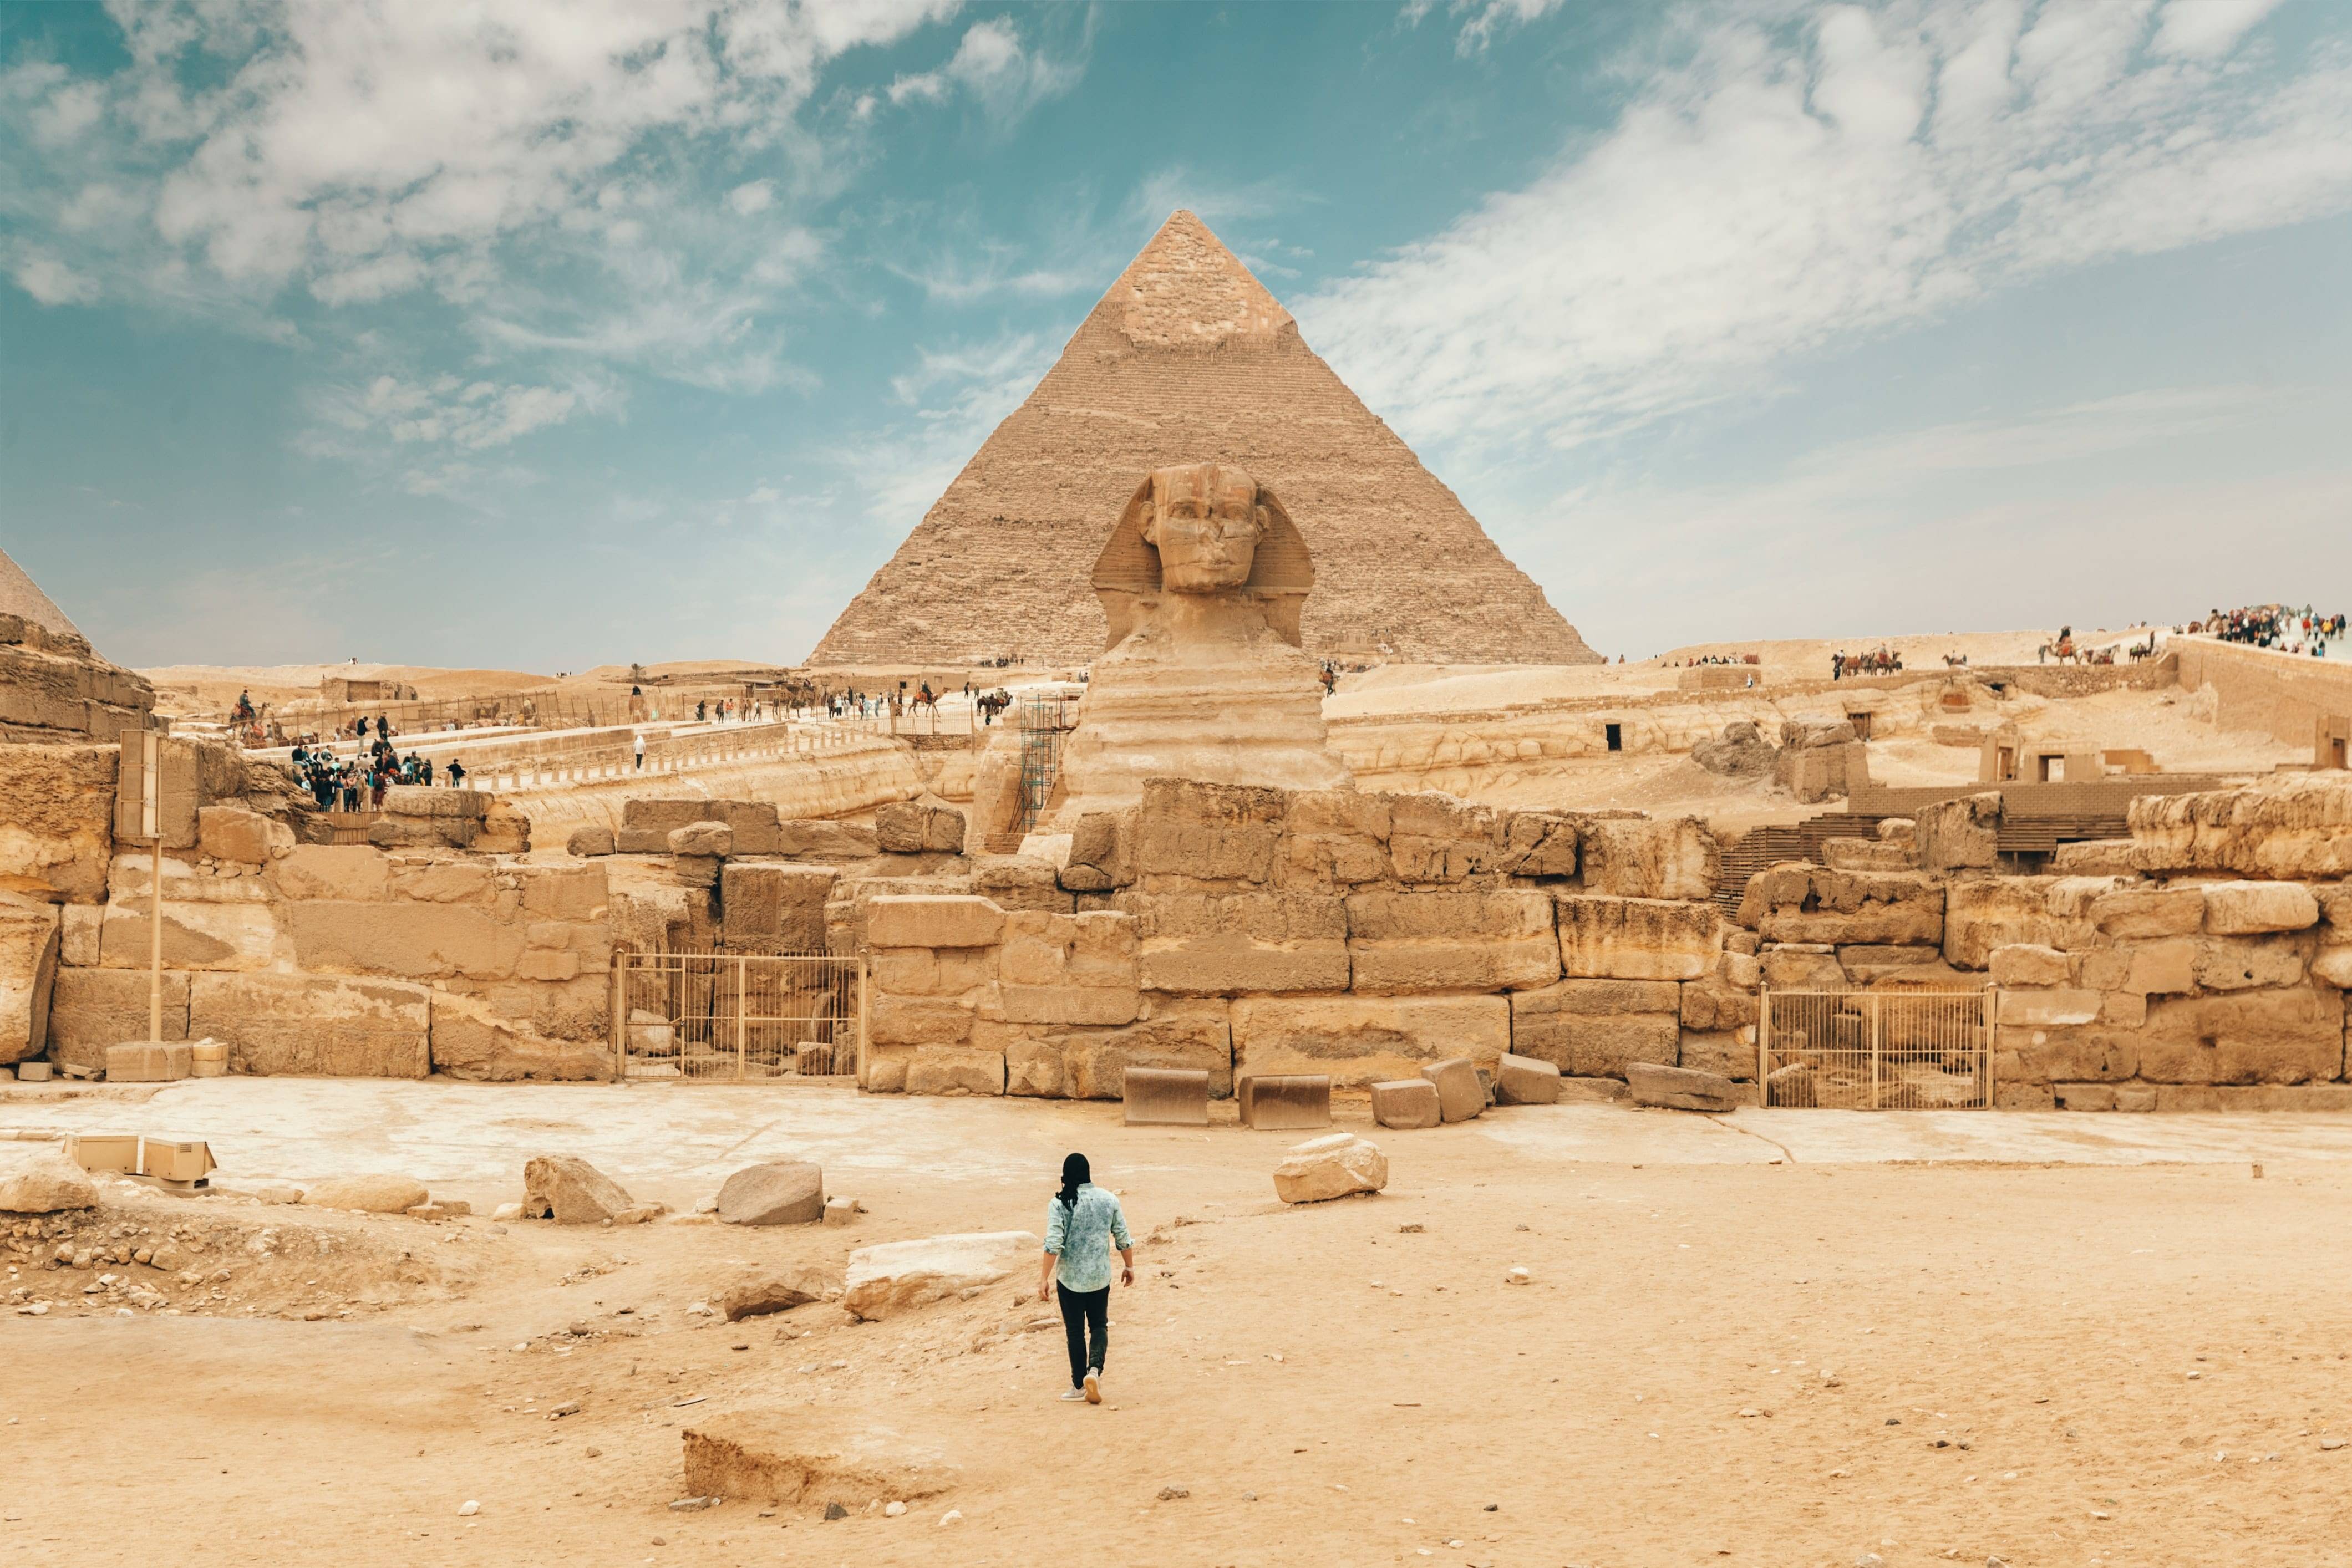 A must see in Egypt - The Great Pyramids and Great Sphinx